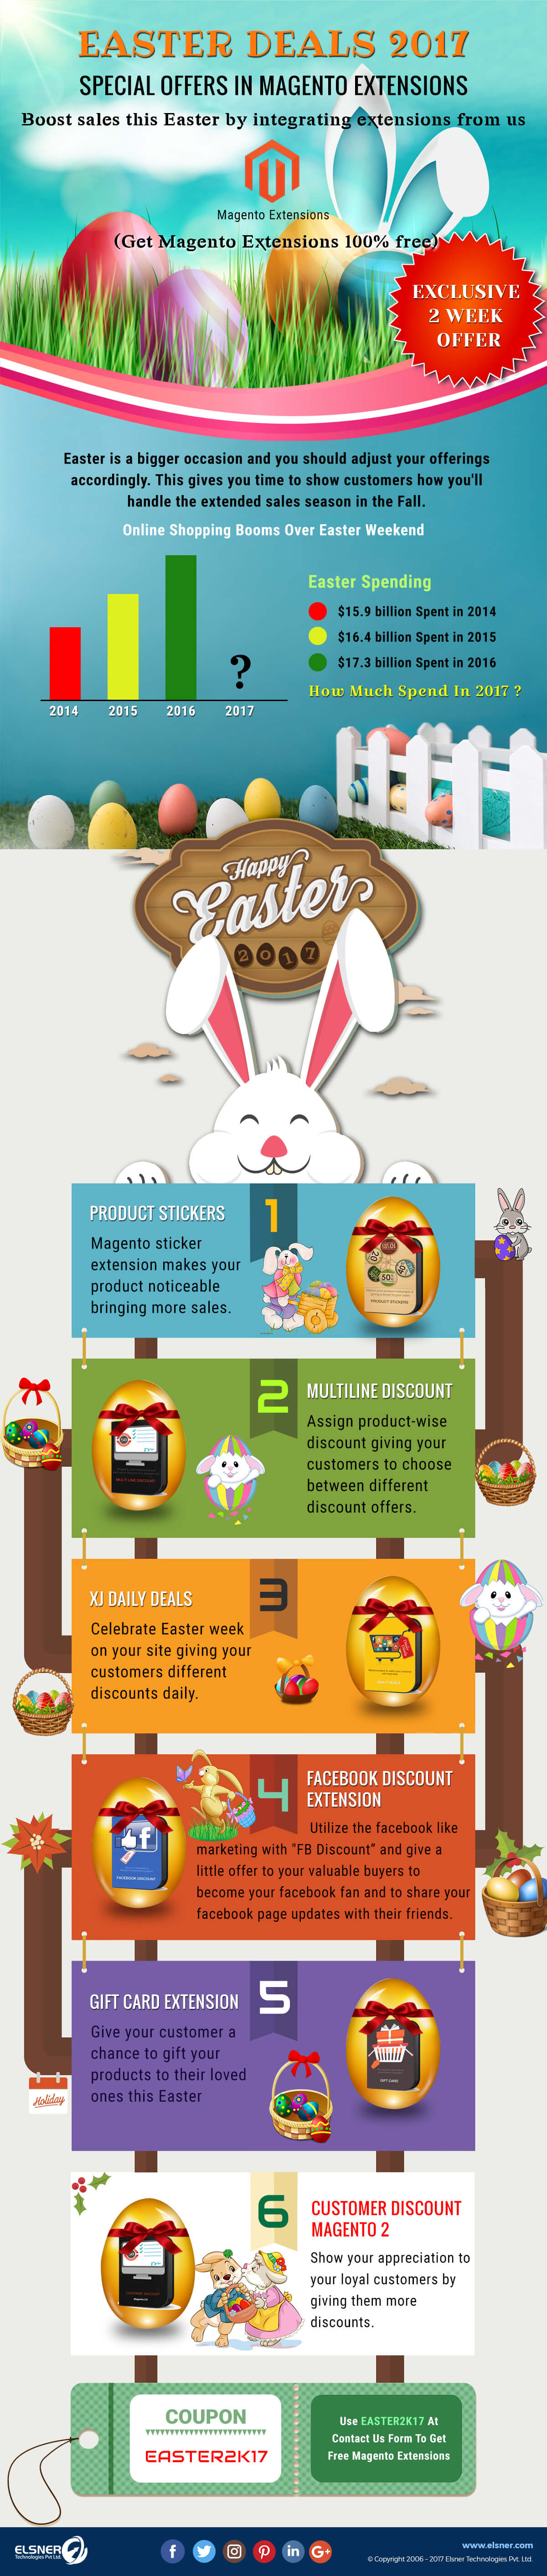 Easter-Treat-Get-Sales-Booster-Premium-Magento-Extensions-free